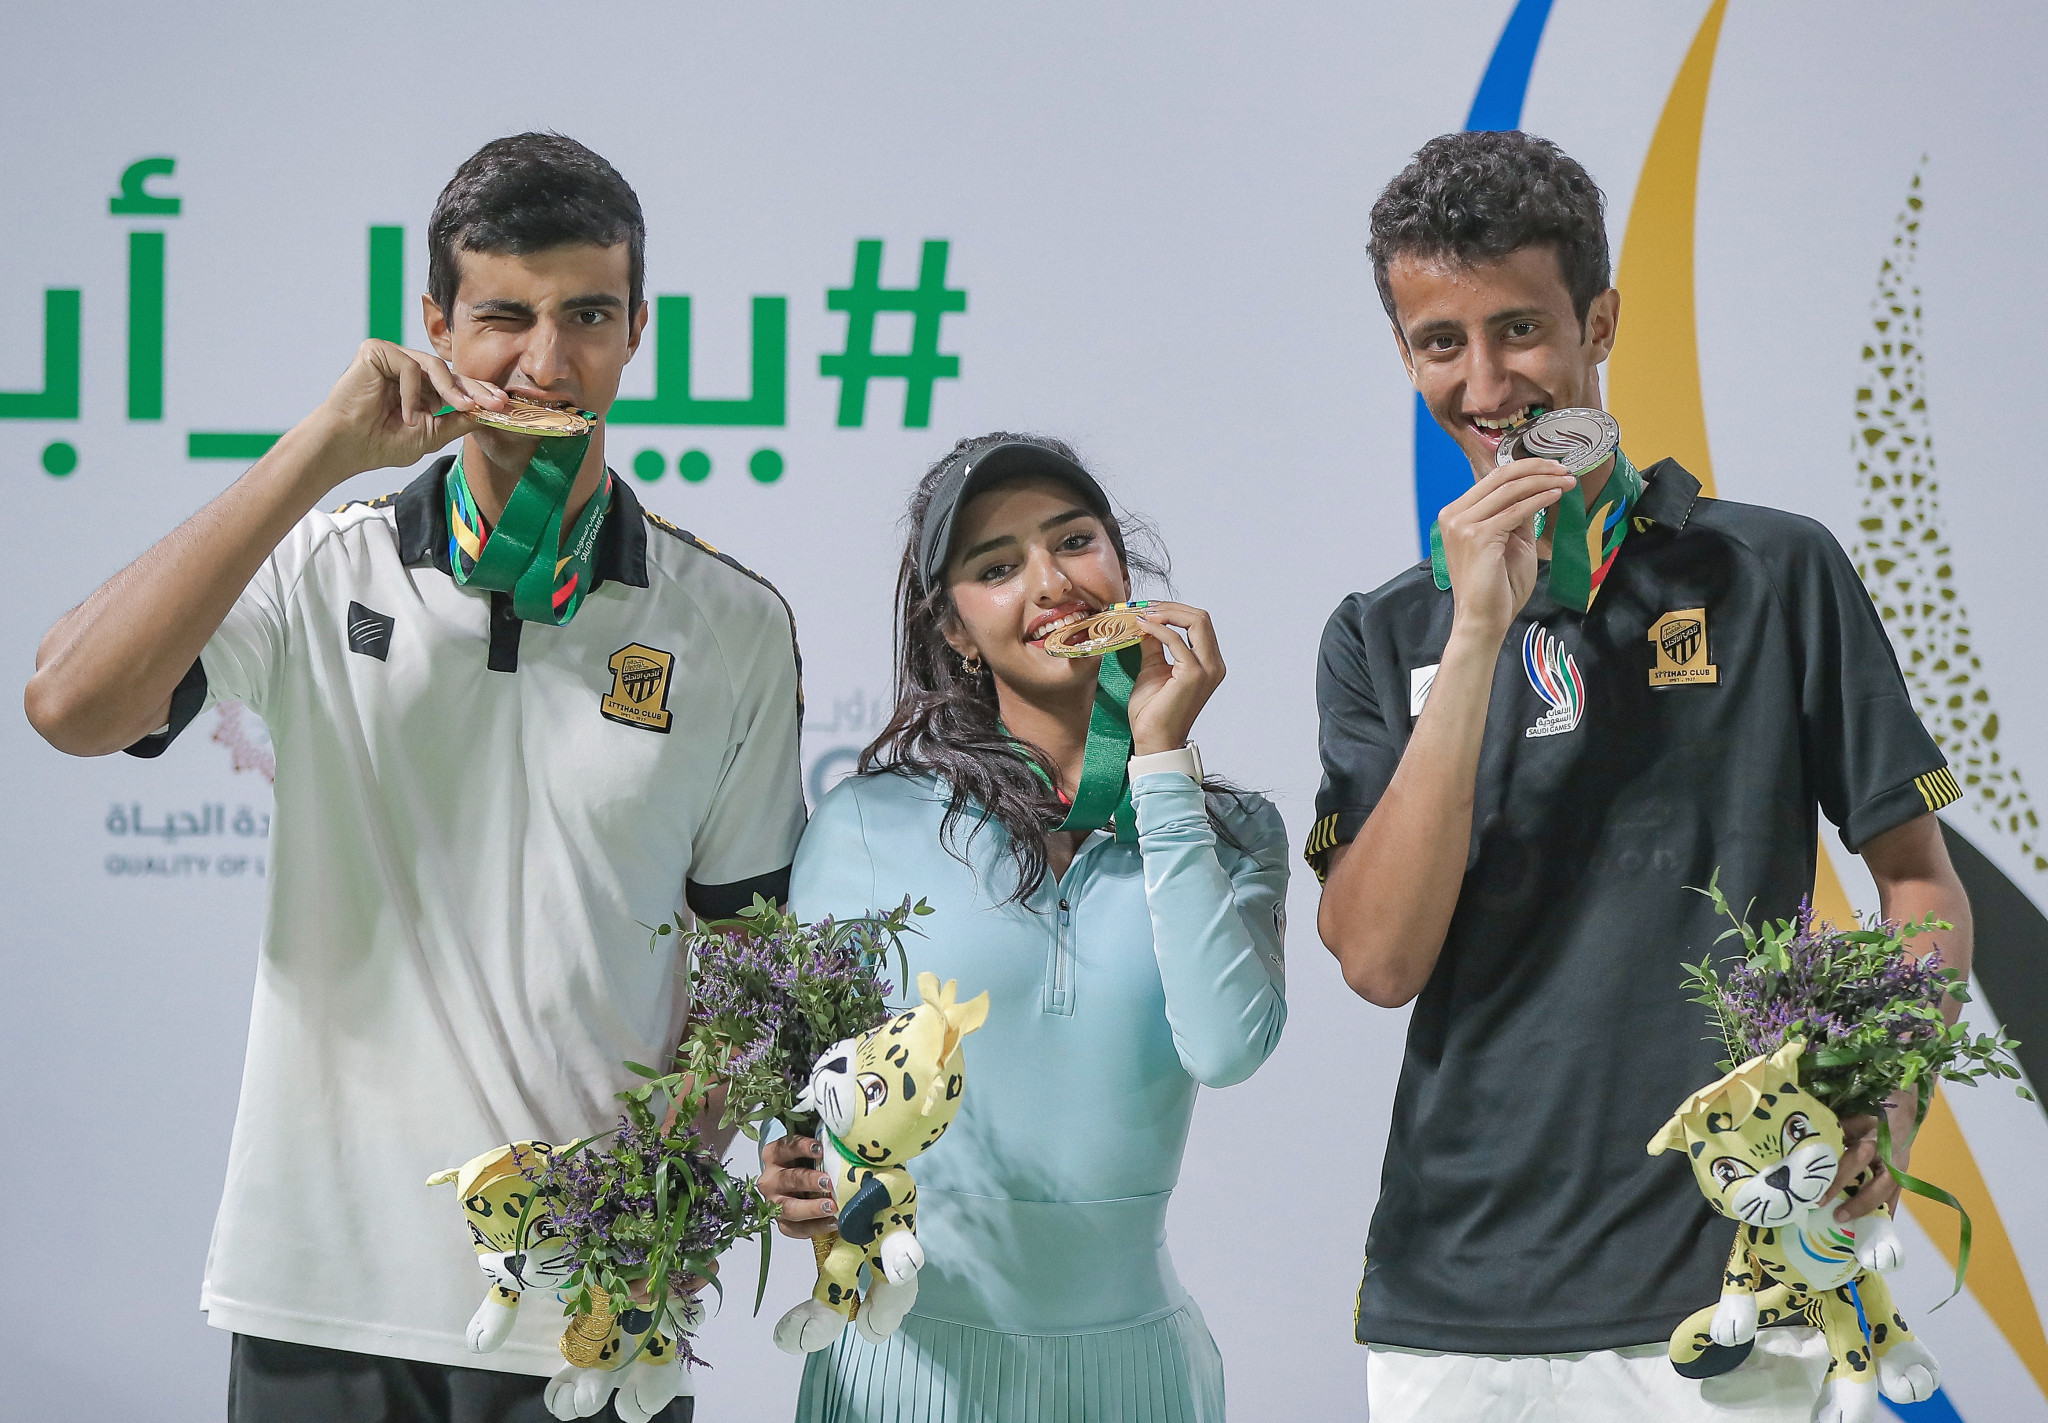 Saud, left, Yara, centre and Ammar, right, won three tennis medals between them to deliver huge success for the Al-Hagbani family ©Saudi Games